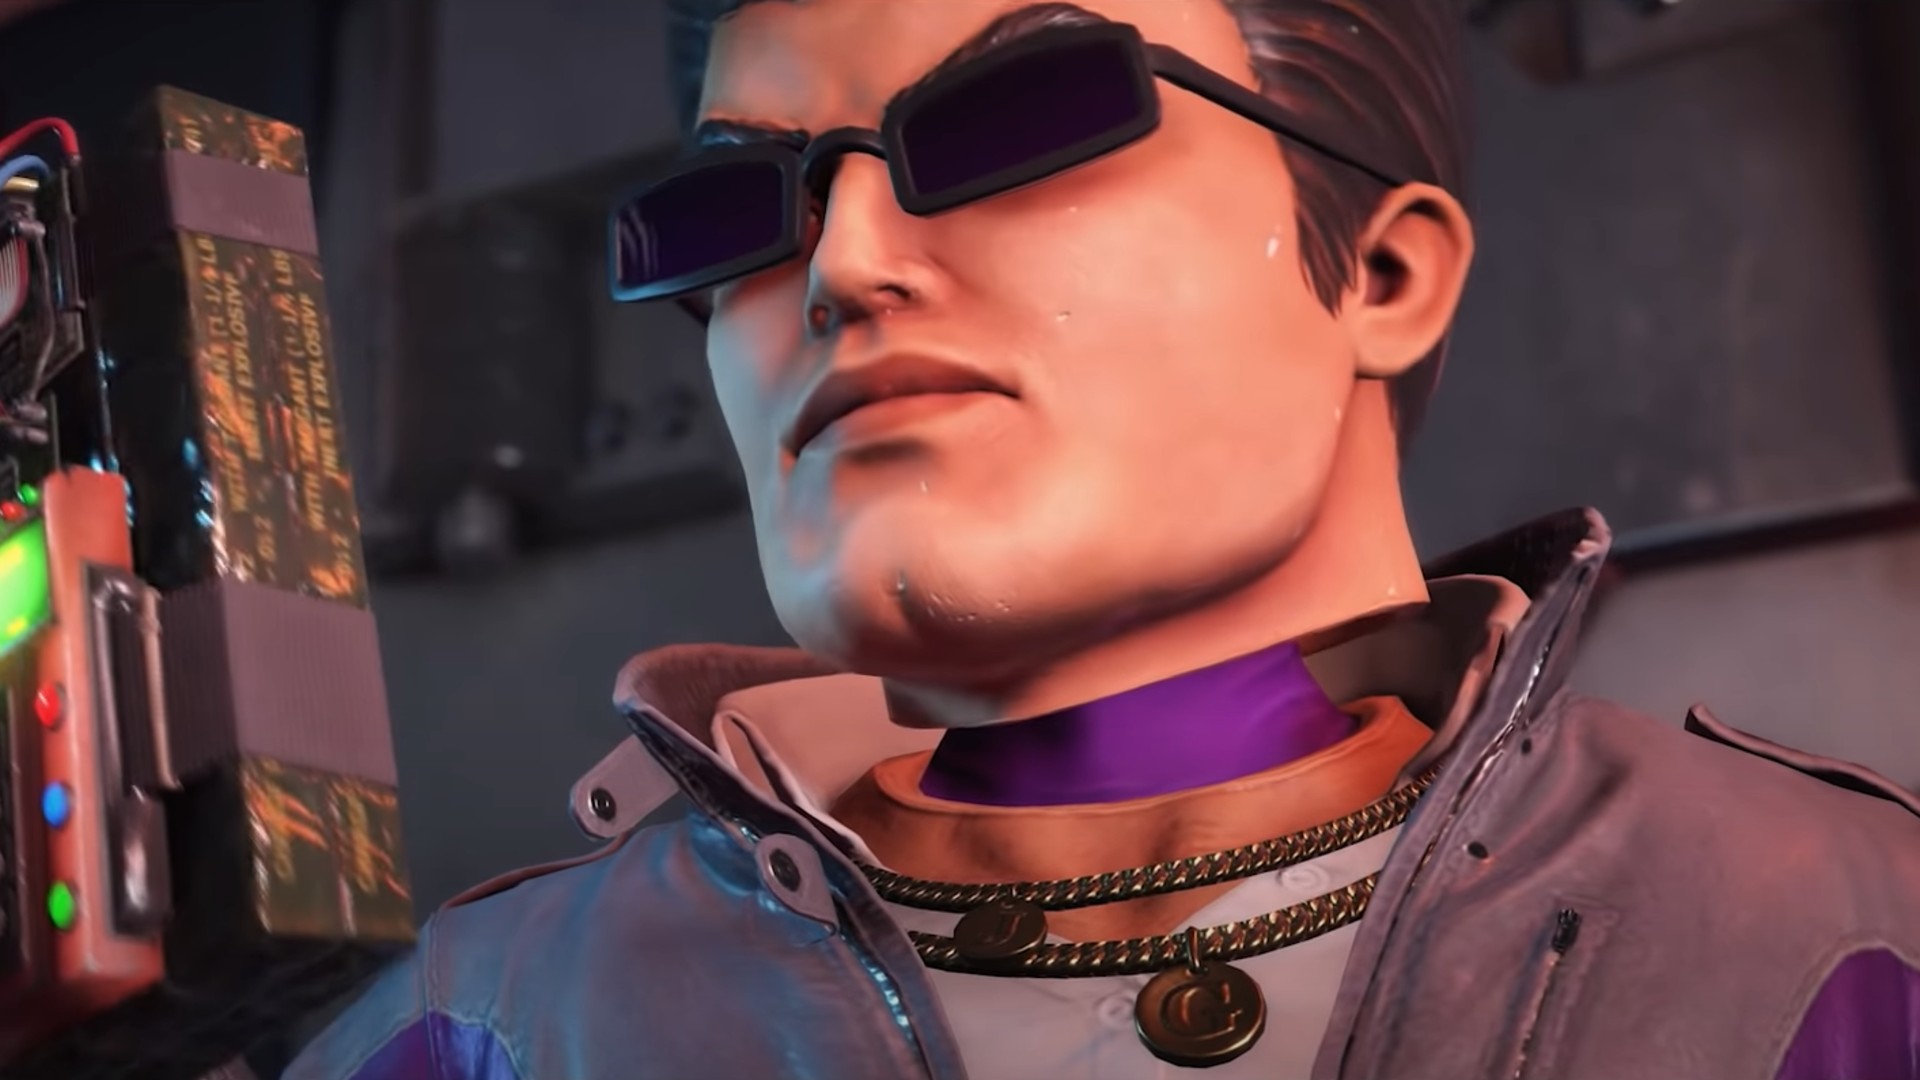 Saints Row Gameplay Reassures Hesitant Fans About the Reboot